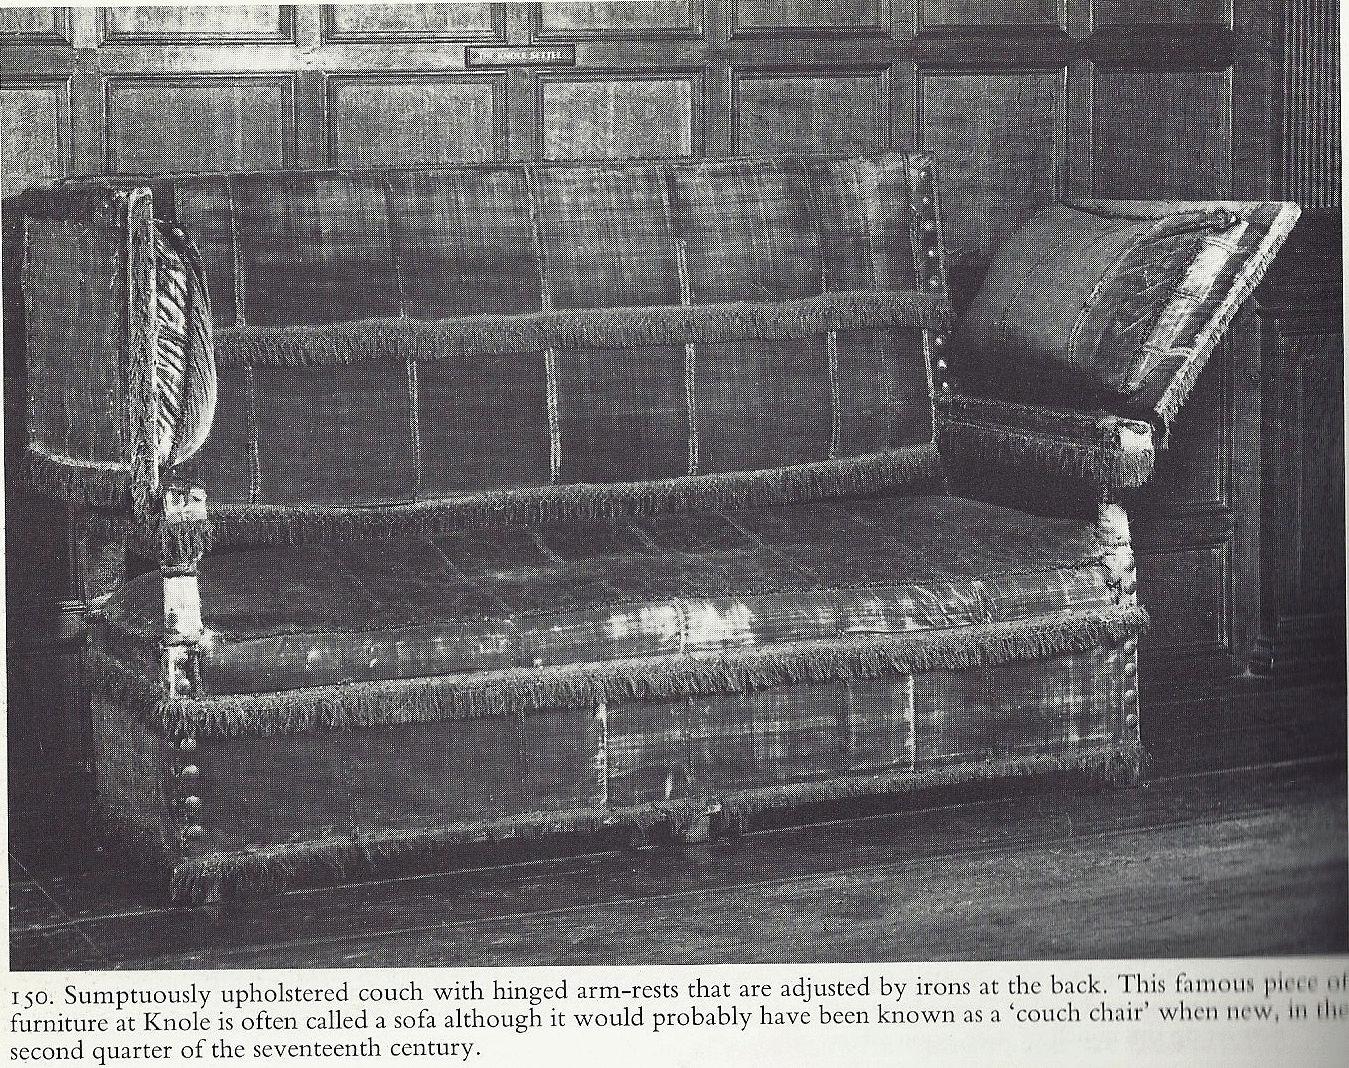 - EXCEPTIONALLY, RARE, MUSEUM QUALITY PIECE, THE COWDRAY PARK KNOLE SETTEE, INVENTORY NUMBER D2029
-  Supplied by Lengyon & Co, the pre-eminent maker, to Viscount Cowdray, Cowdray Park, Sussex.  Part of the furnishings in the Great Hall at Cowdray